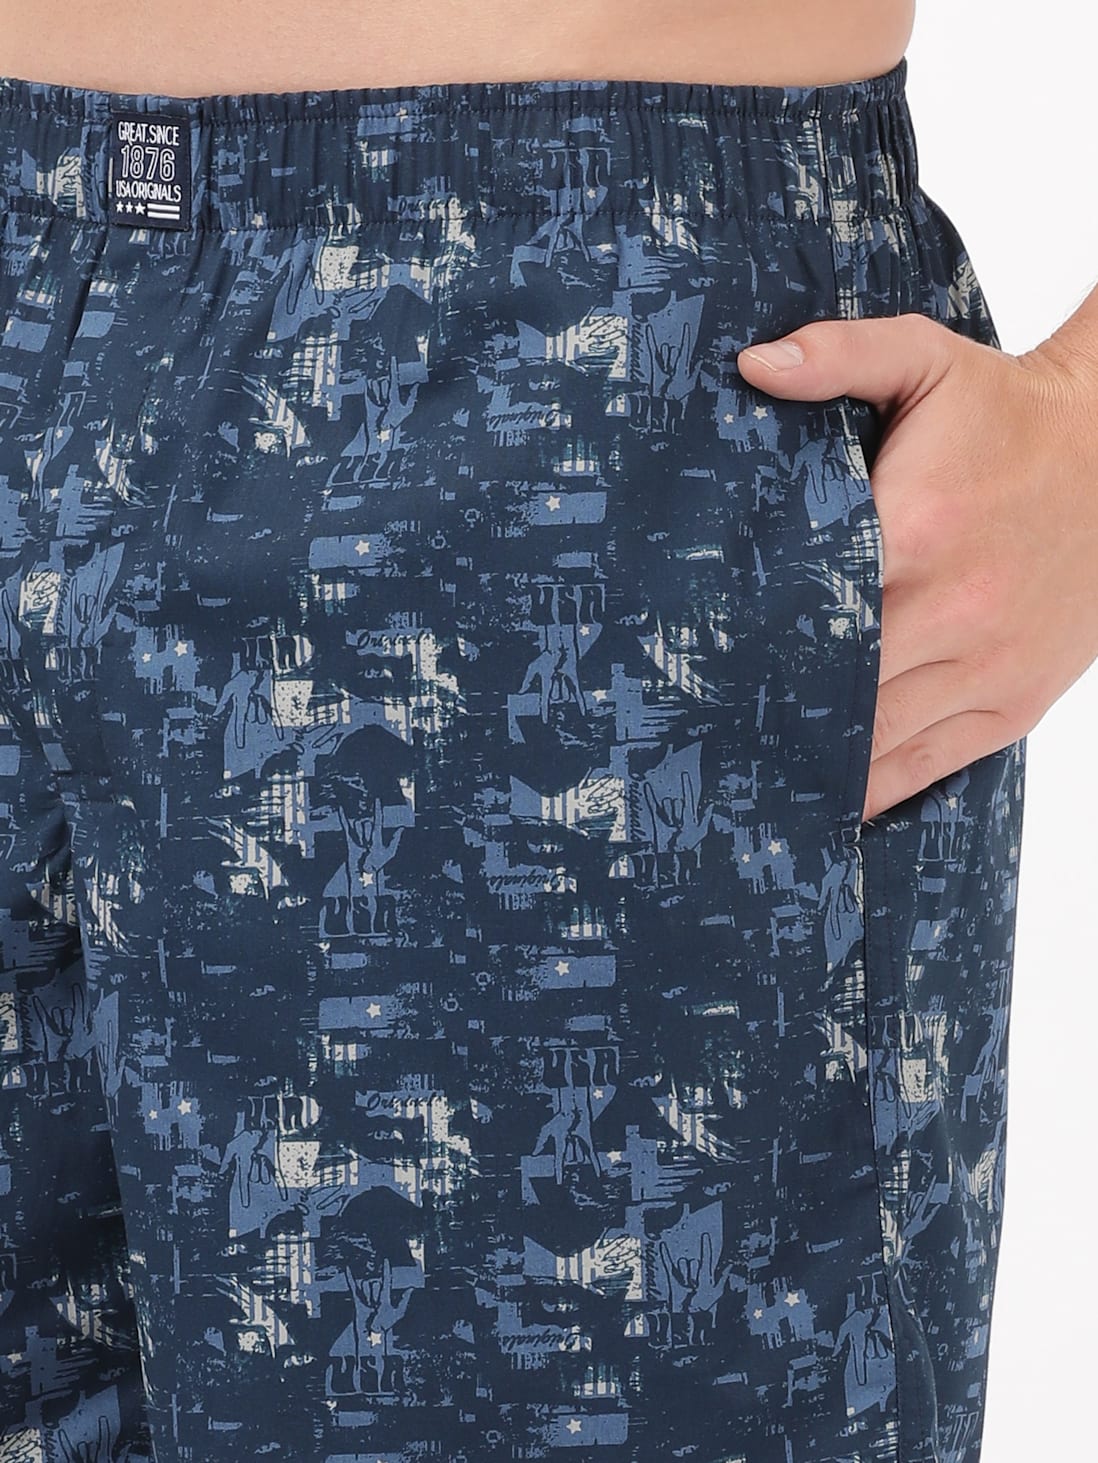 Buy Men's Super Combed Mercerized Cotton Woven Printed Boxer Shorts ...